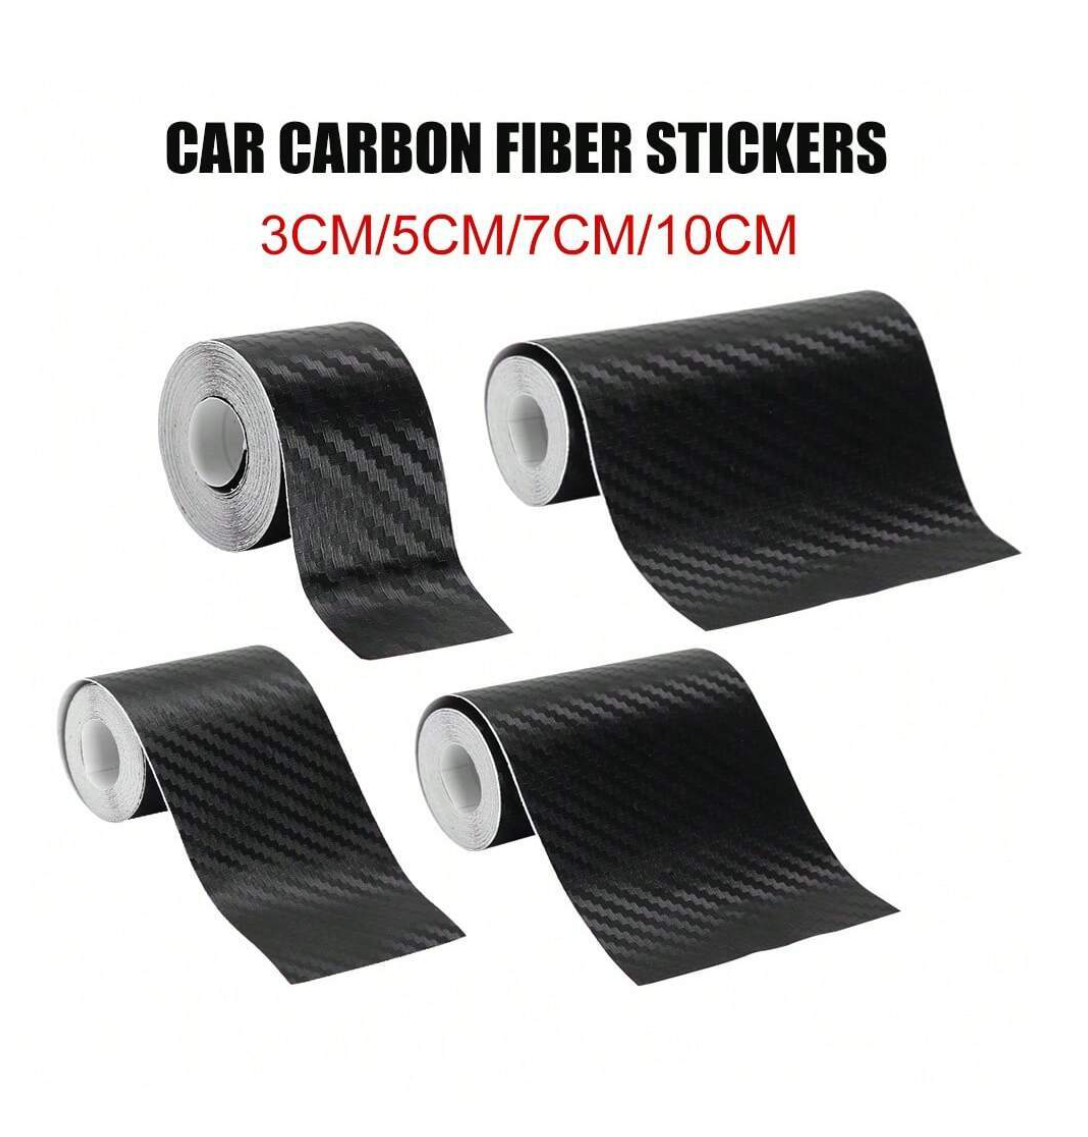 Guardian of Glam: 5D Carbon Fiber Car Door Edge Guards - Stylish Protection for Your Ride!